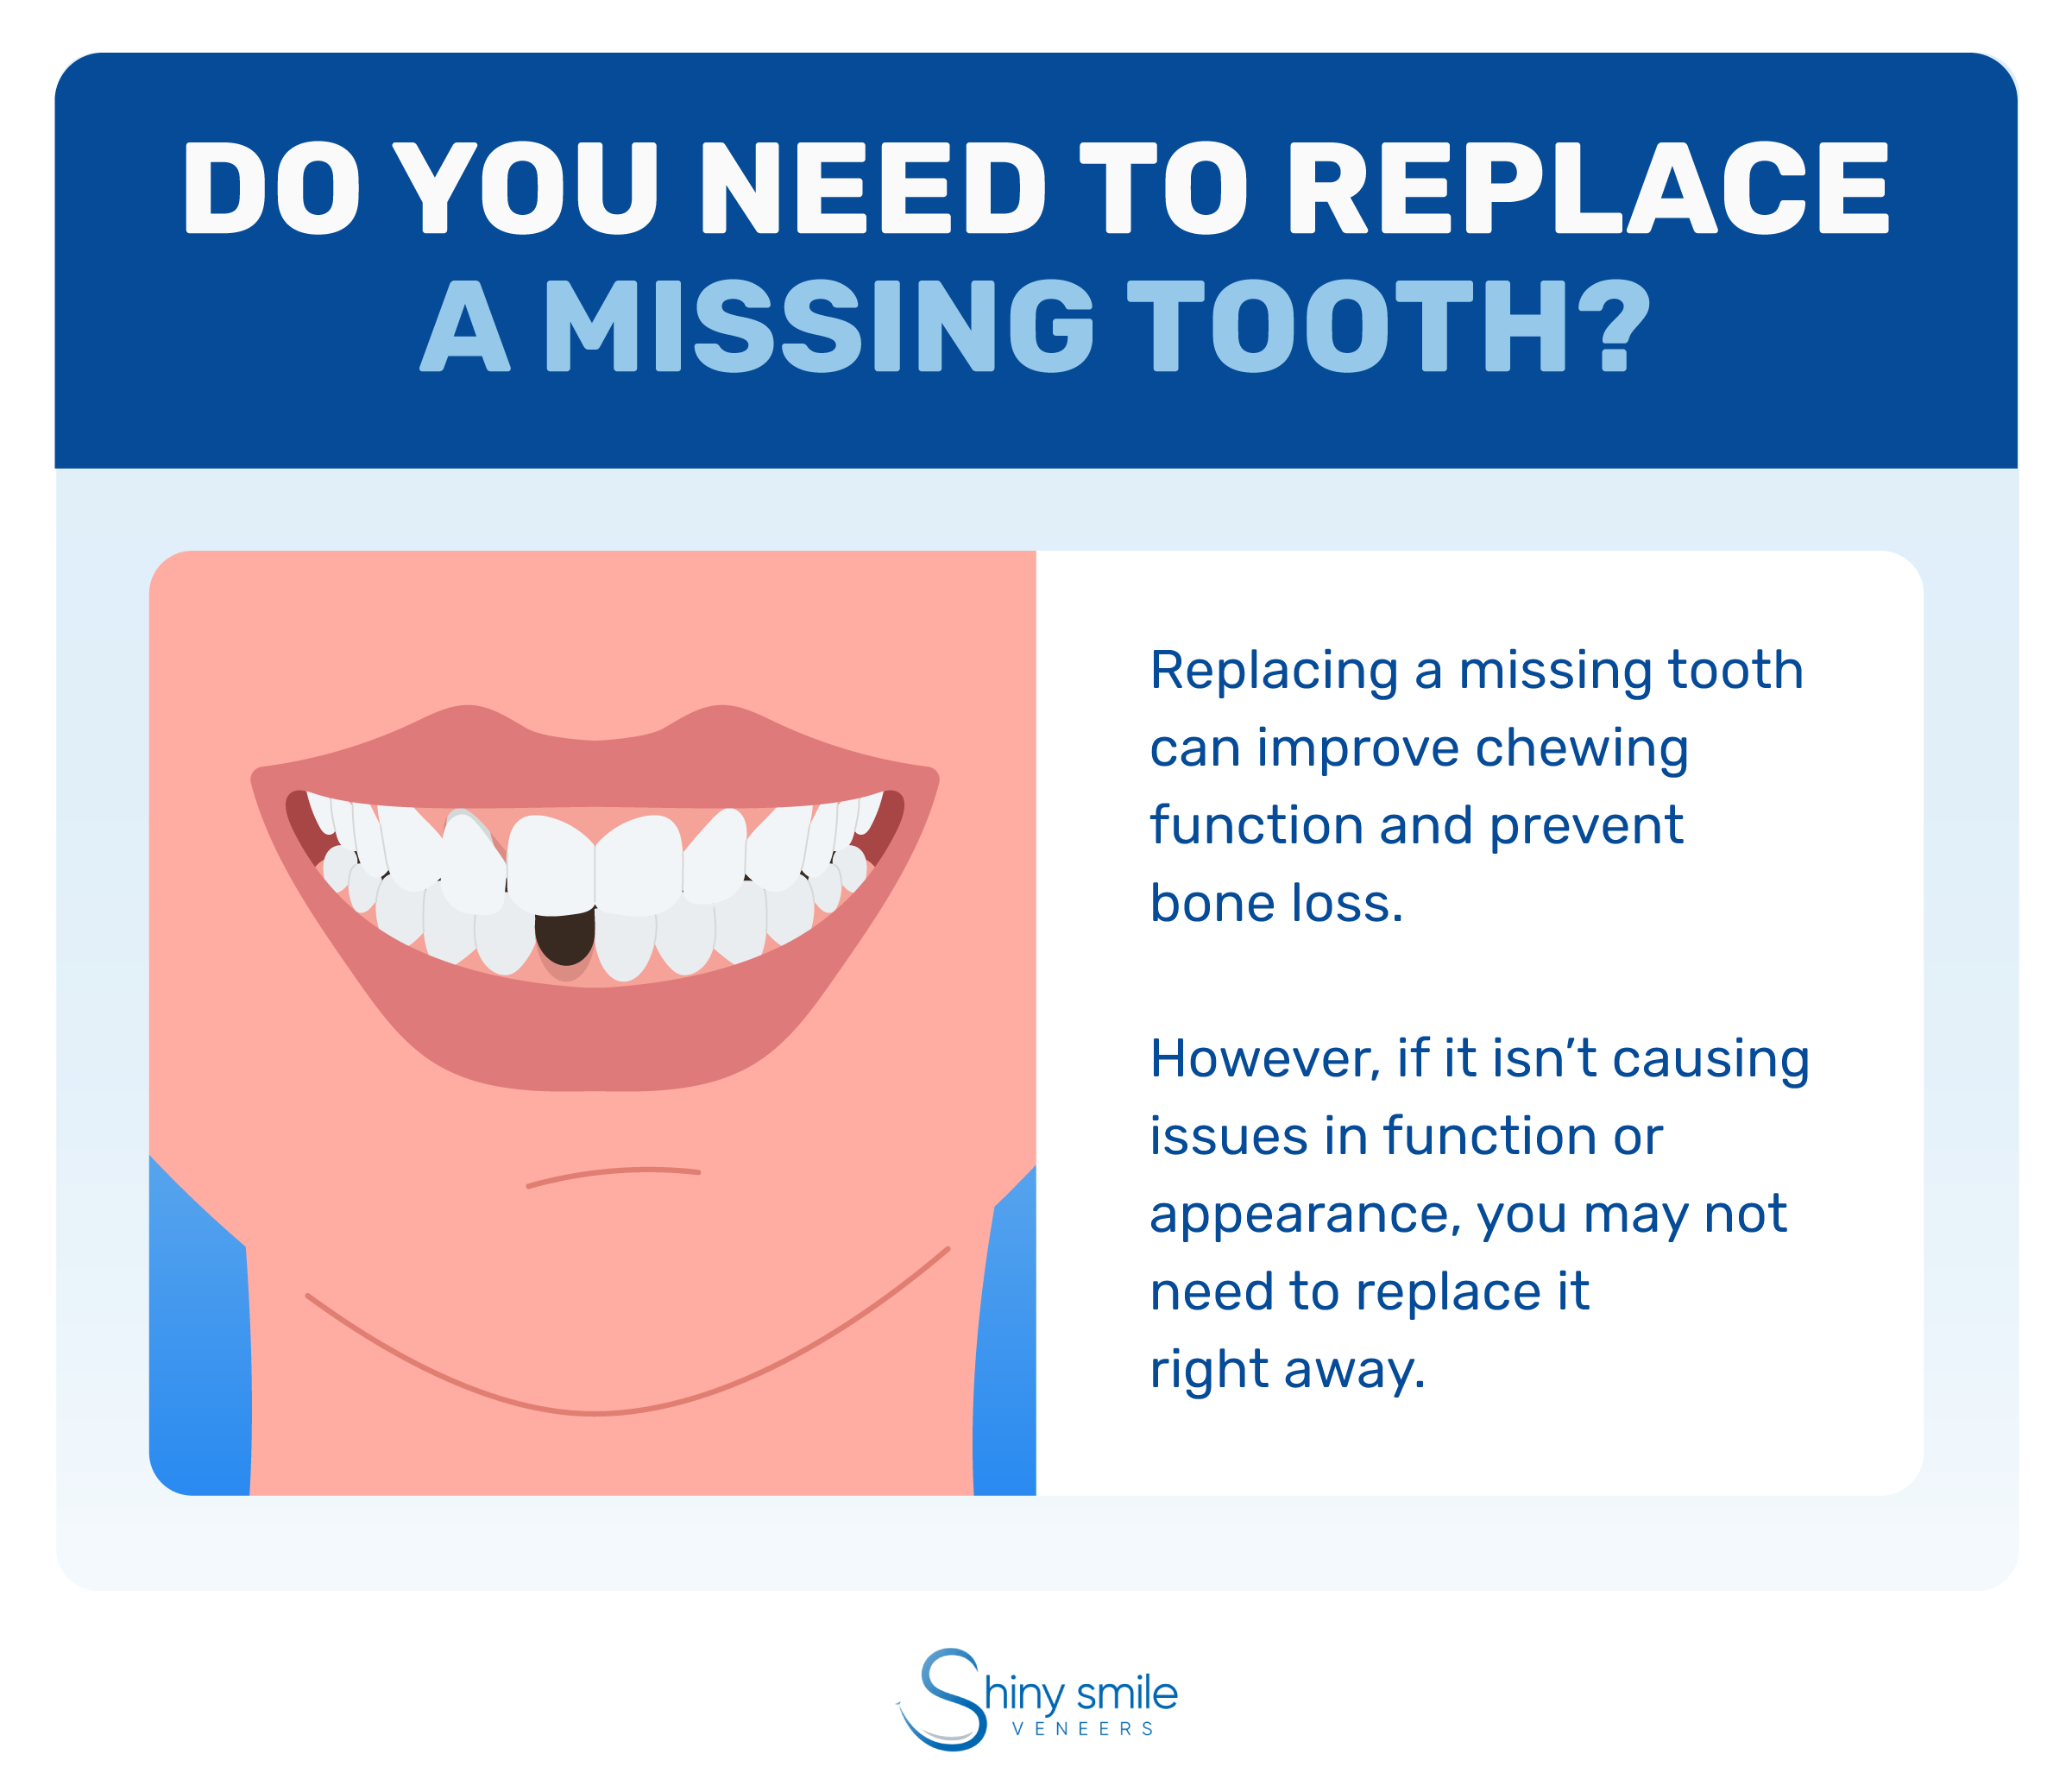 Why you should replace a missing tooth